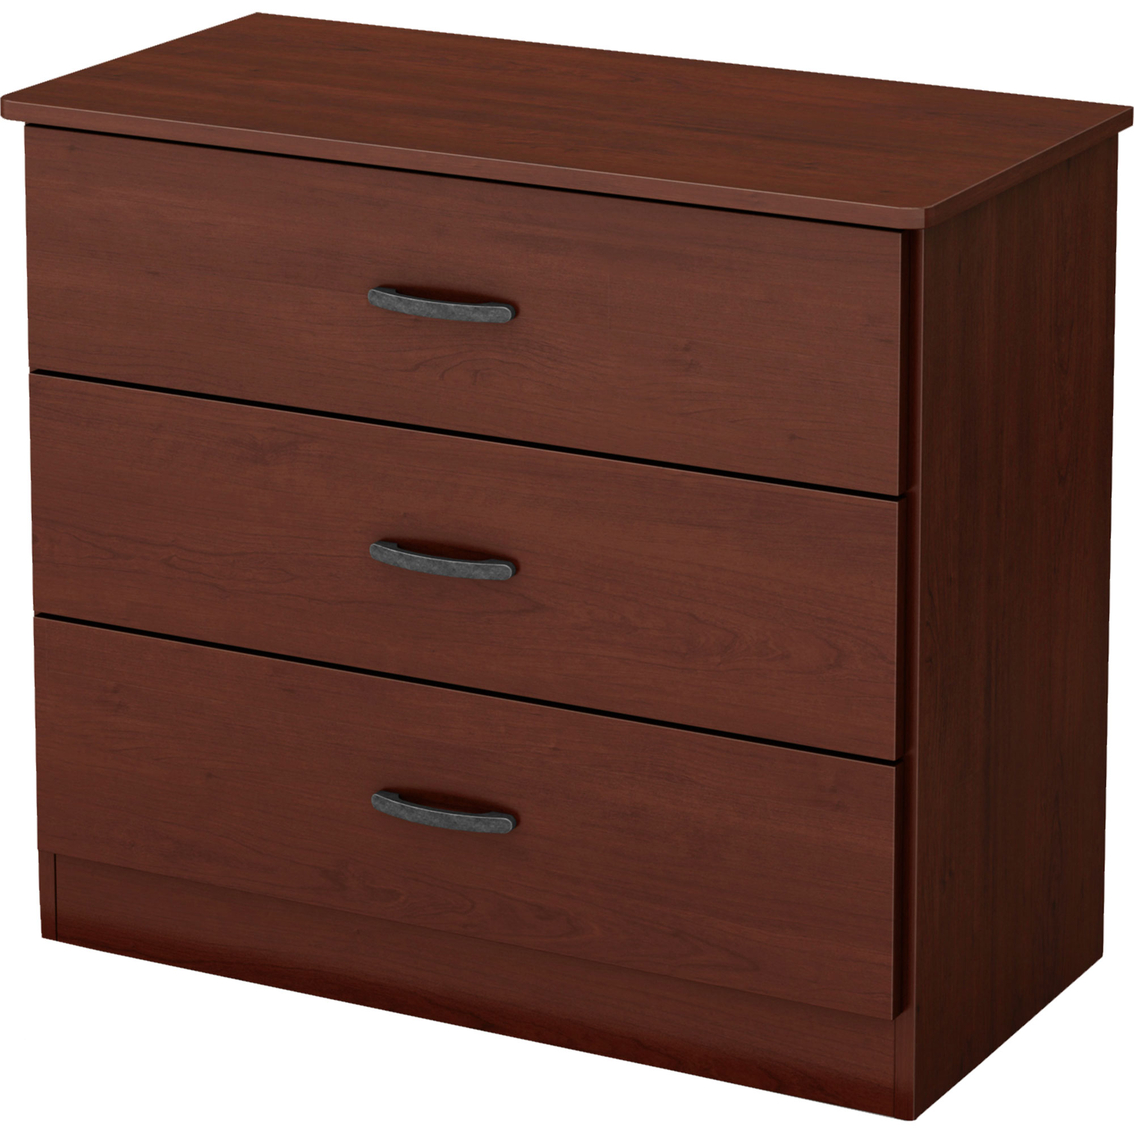 South Shore Libra 3 Drawer Chest Dressers Home Appliances